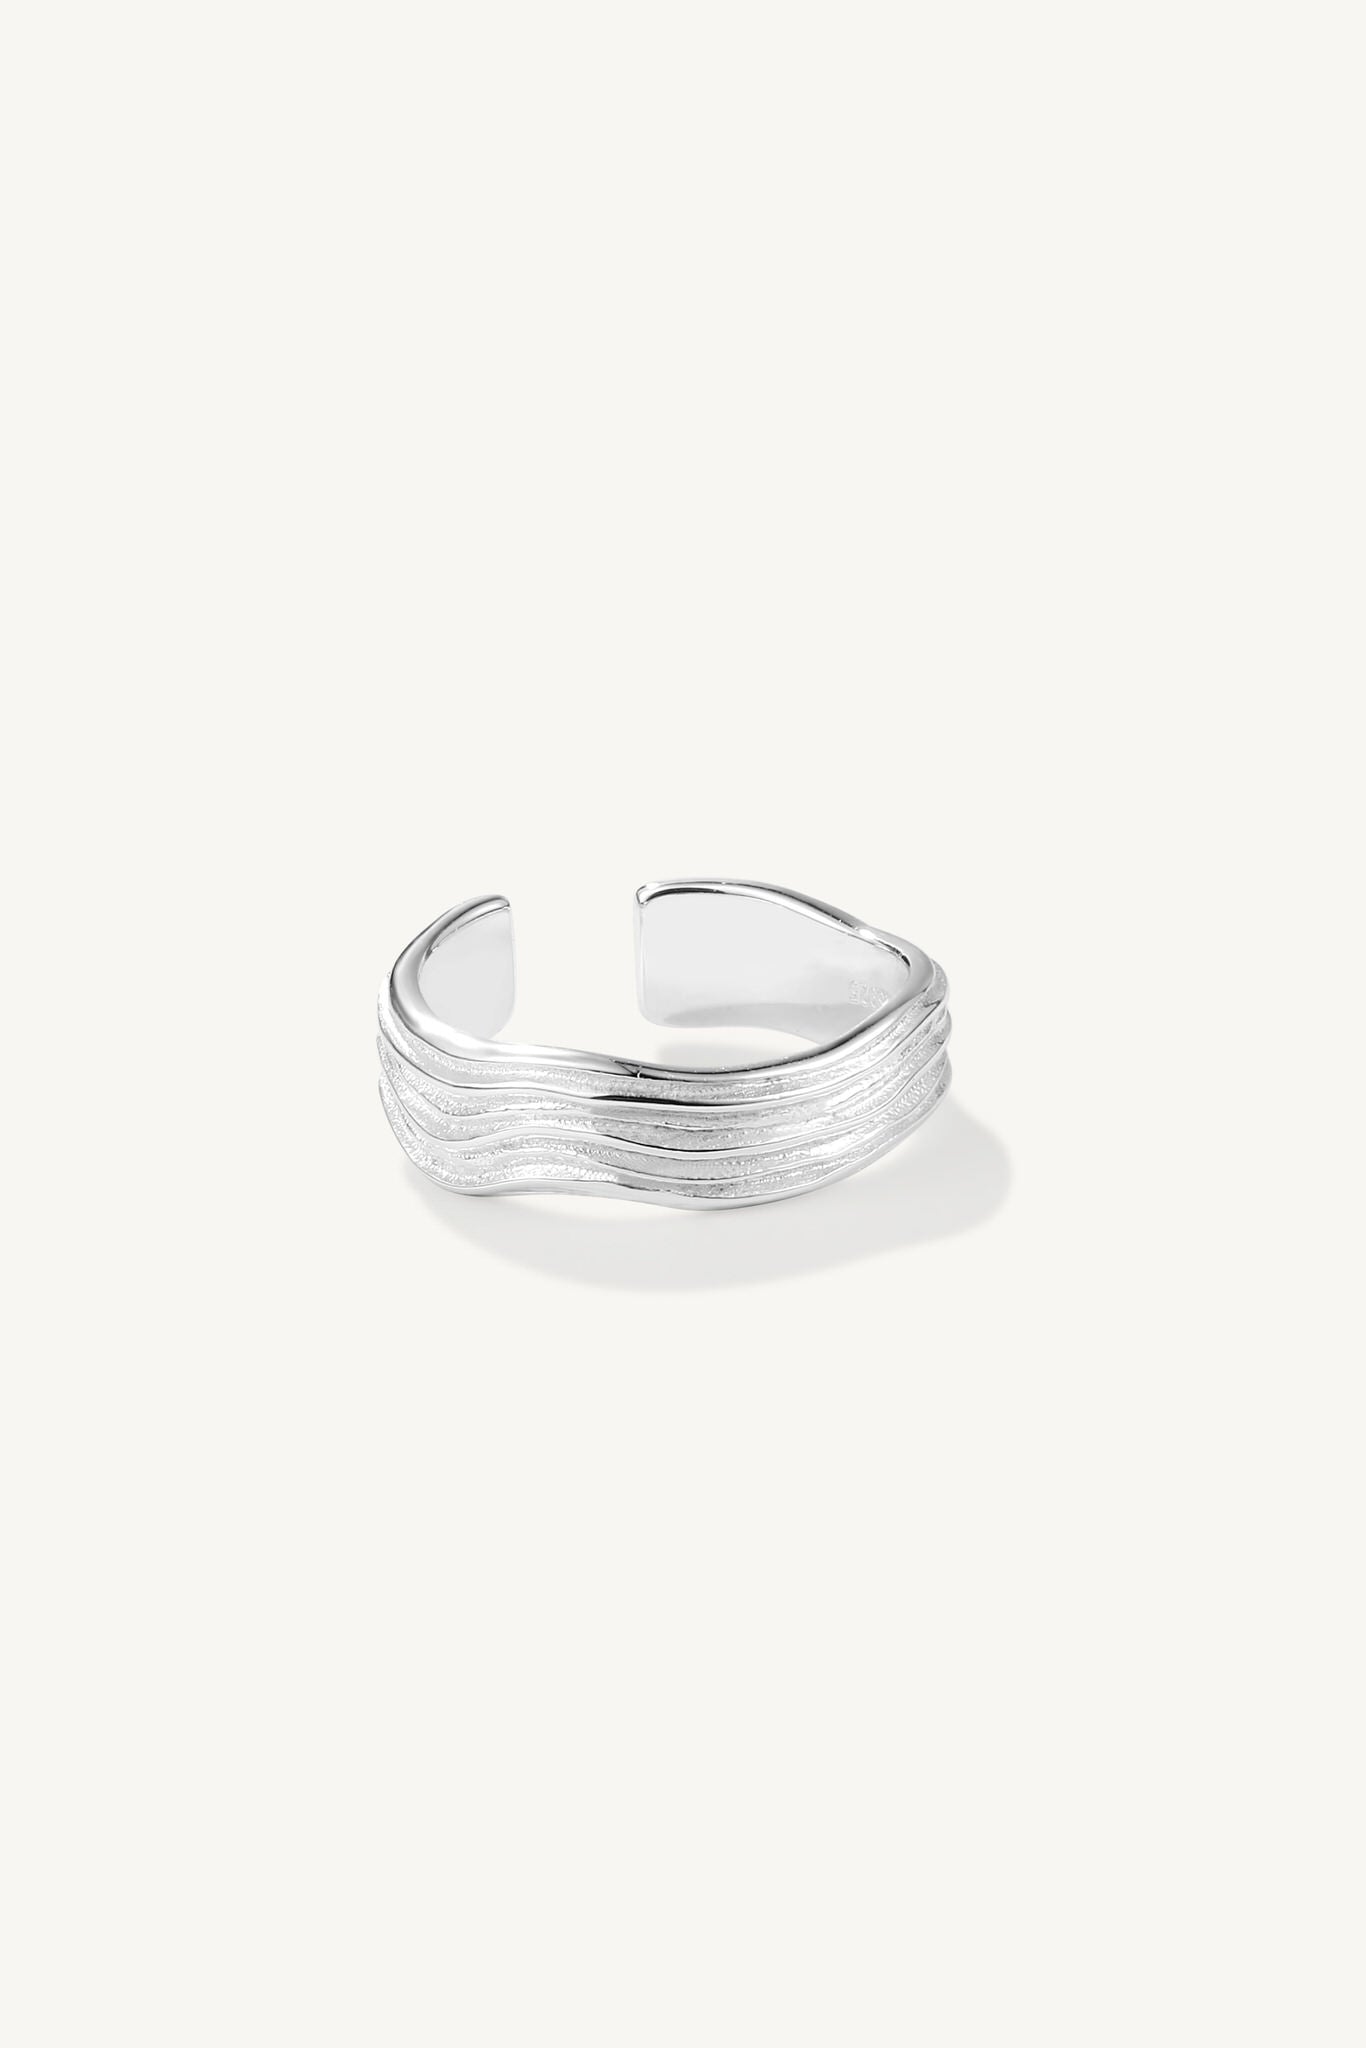  Engraved Shell Lines Open Ring Sterling Silver